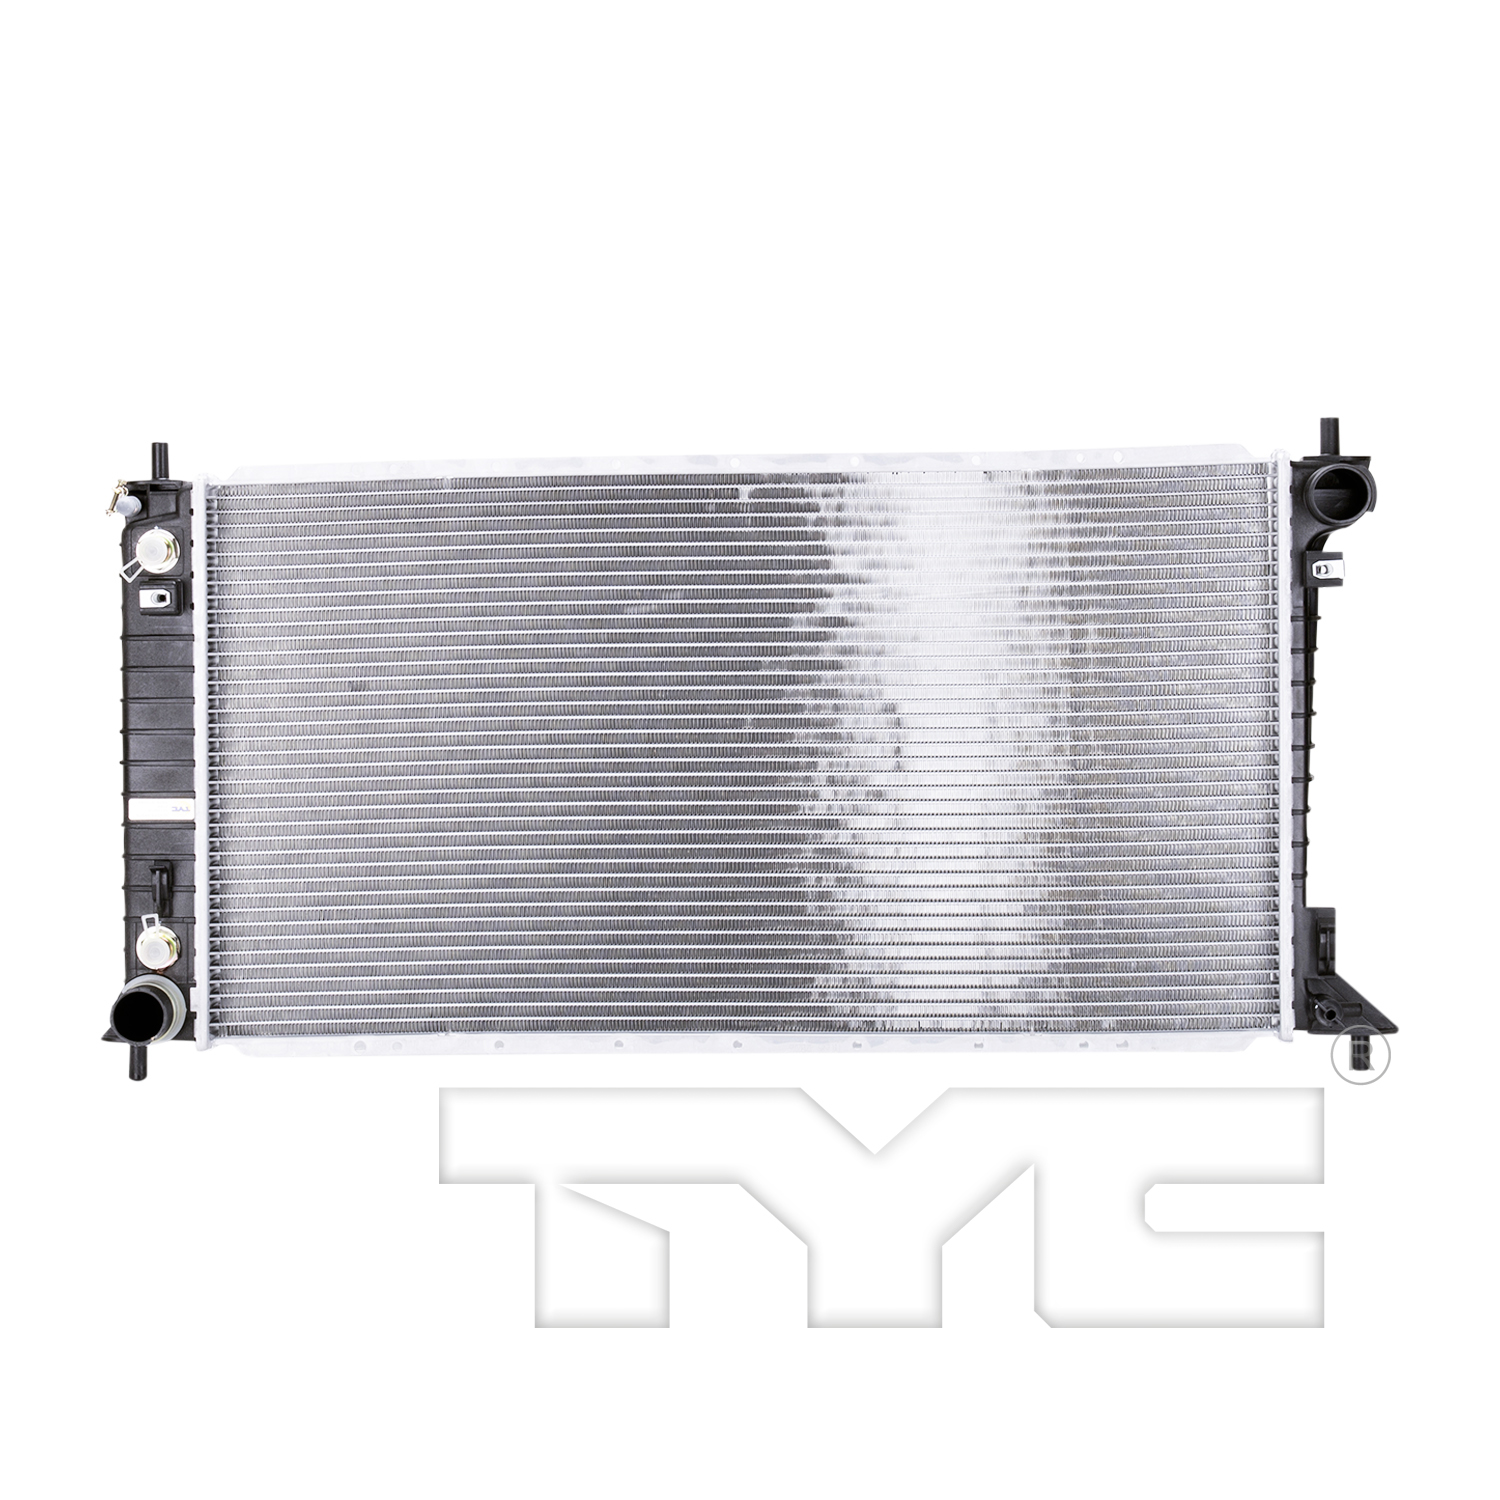 Aftermarket RADIATORS for FORD - EXPEDITION, EXPEDITION,99-02,Radiator assembly